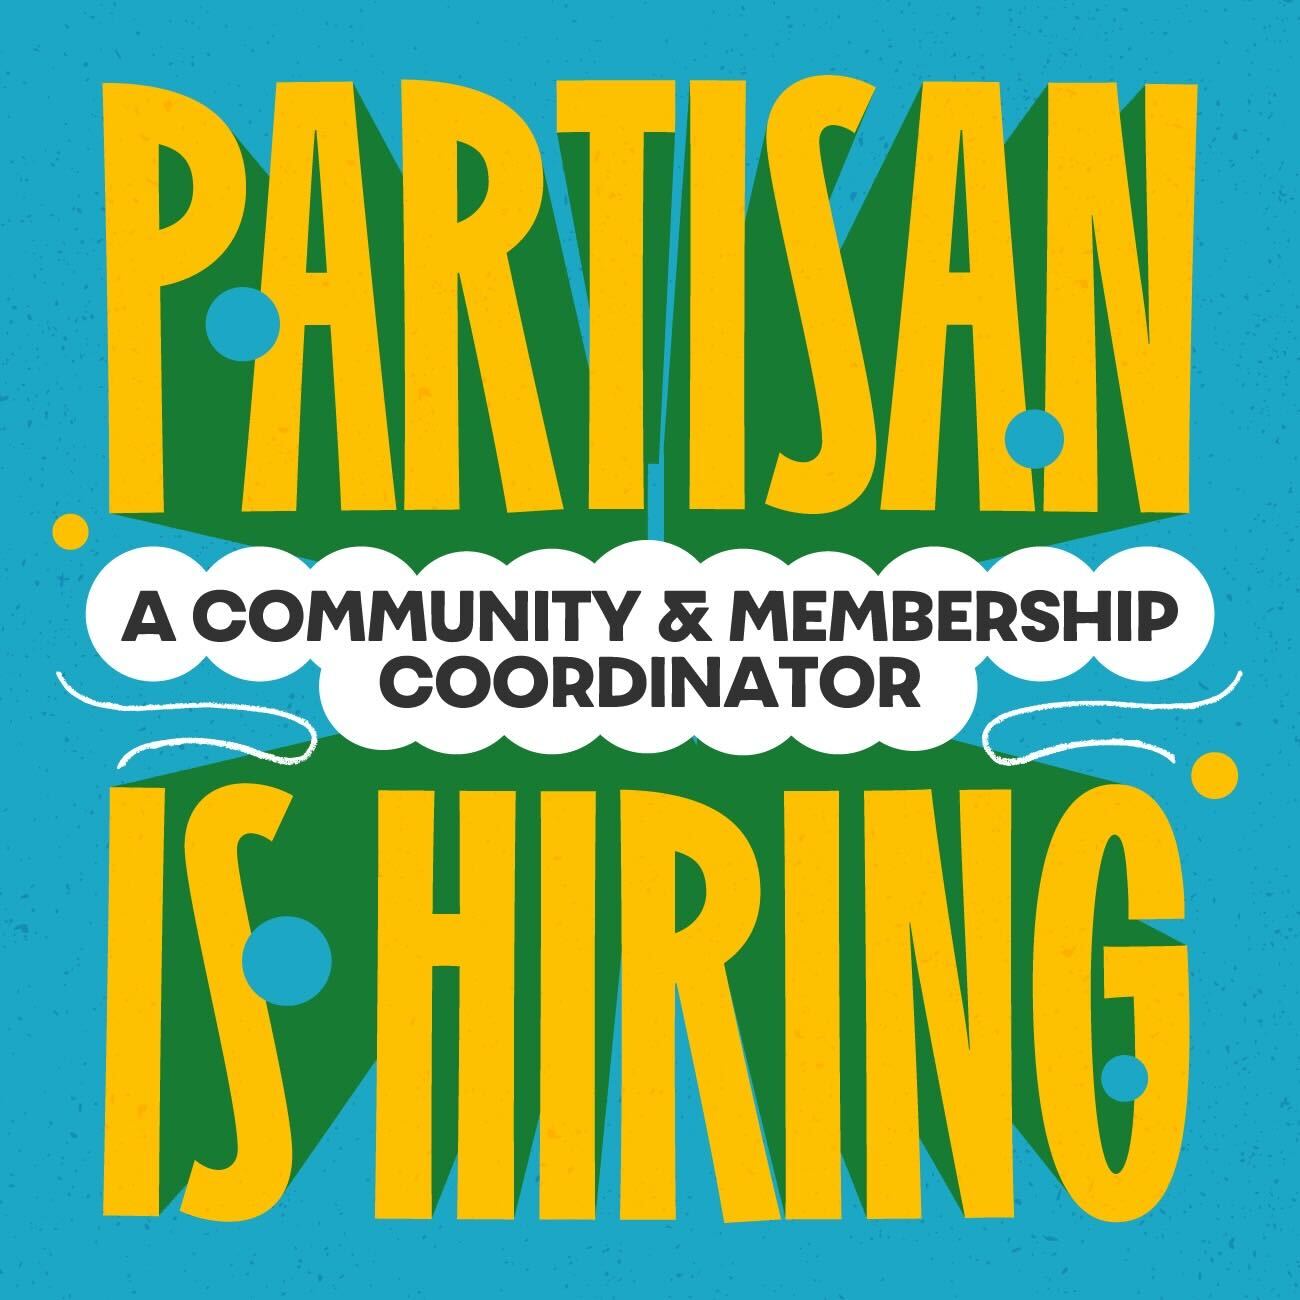 Partisan is hiring a community and membership coodinator